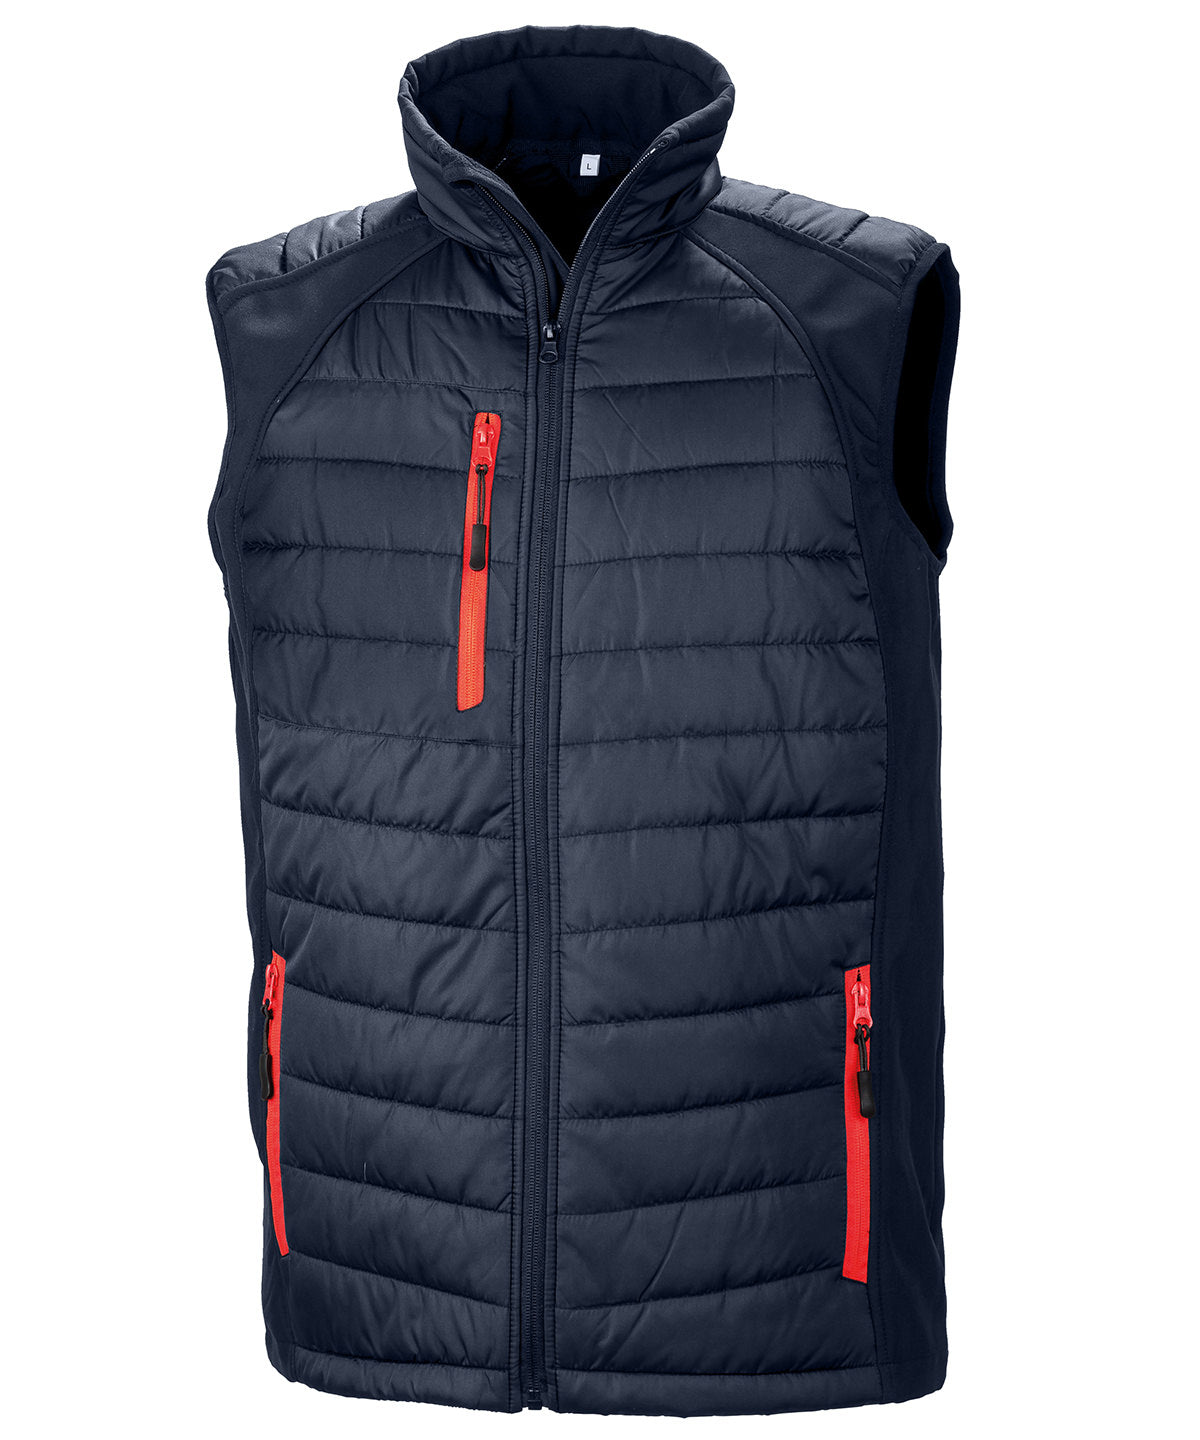 Gilets - Fleece, Shell, Quilted